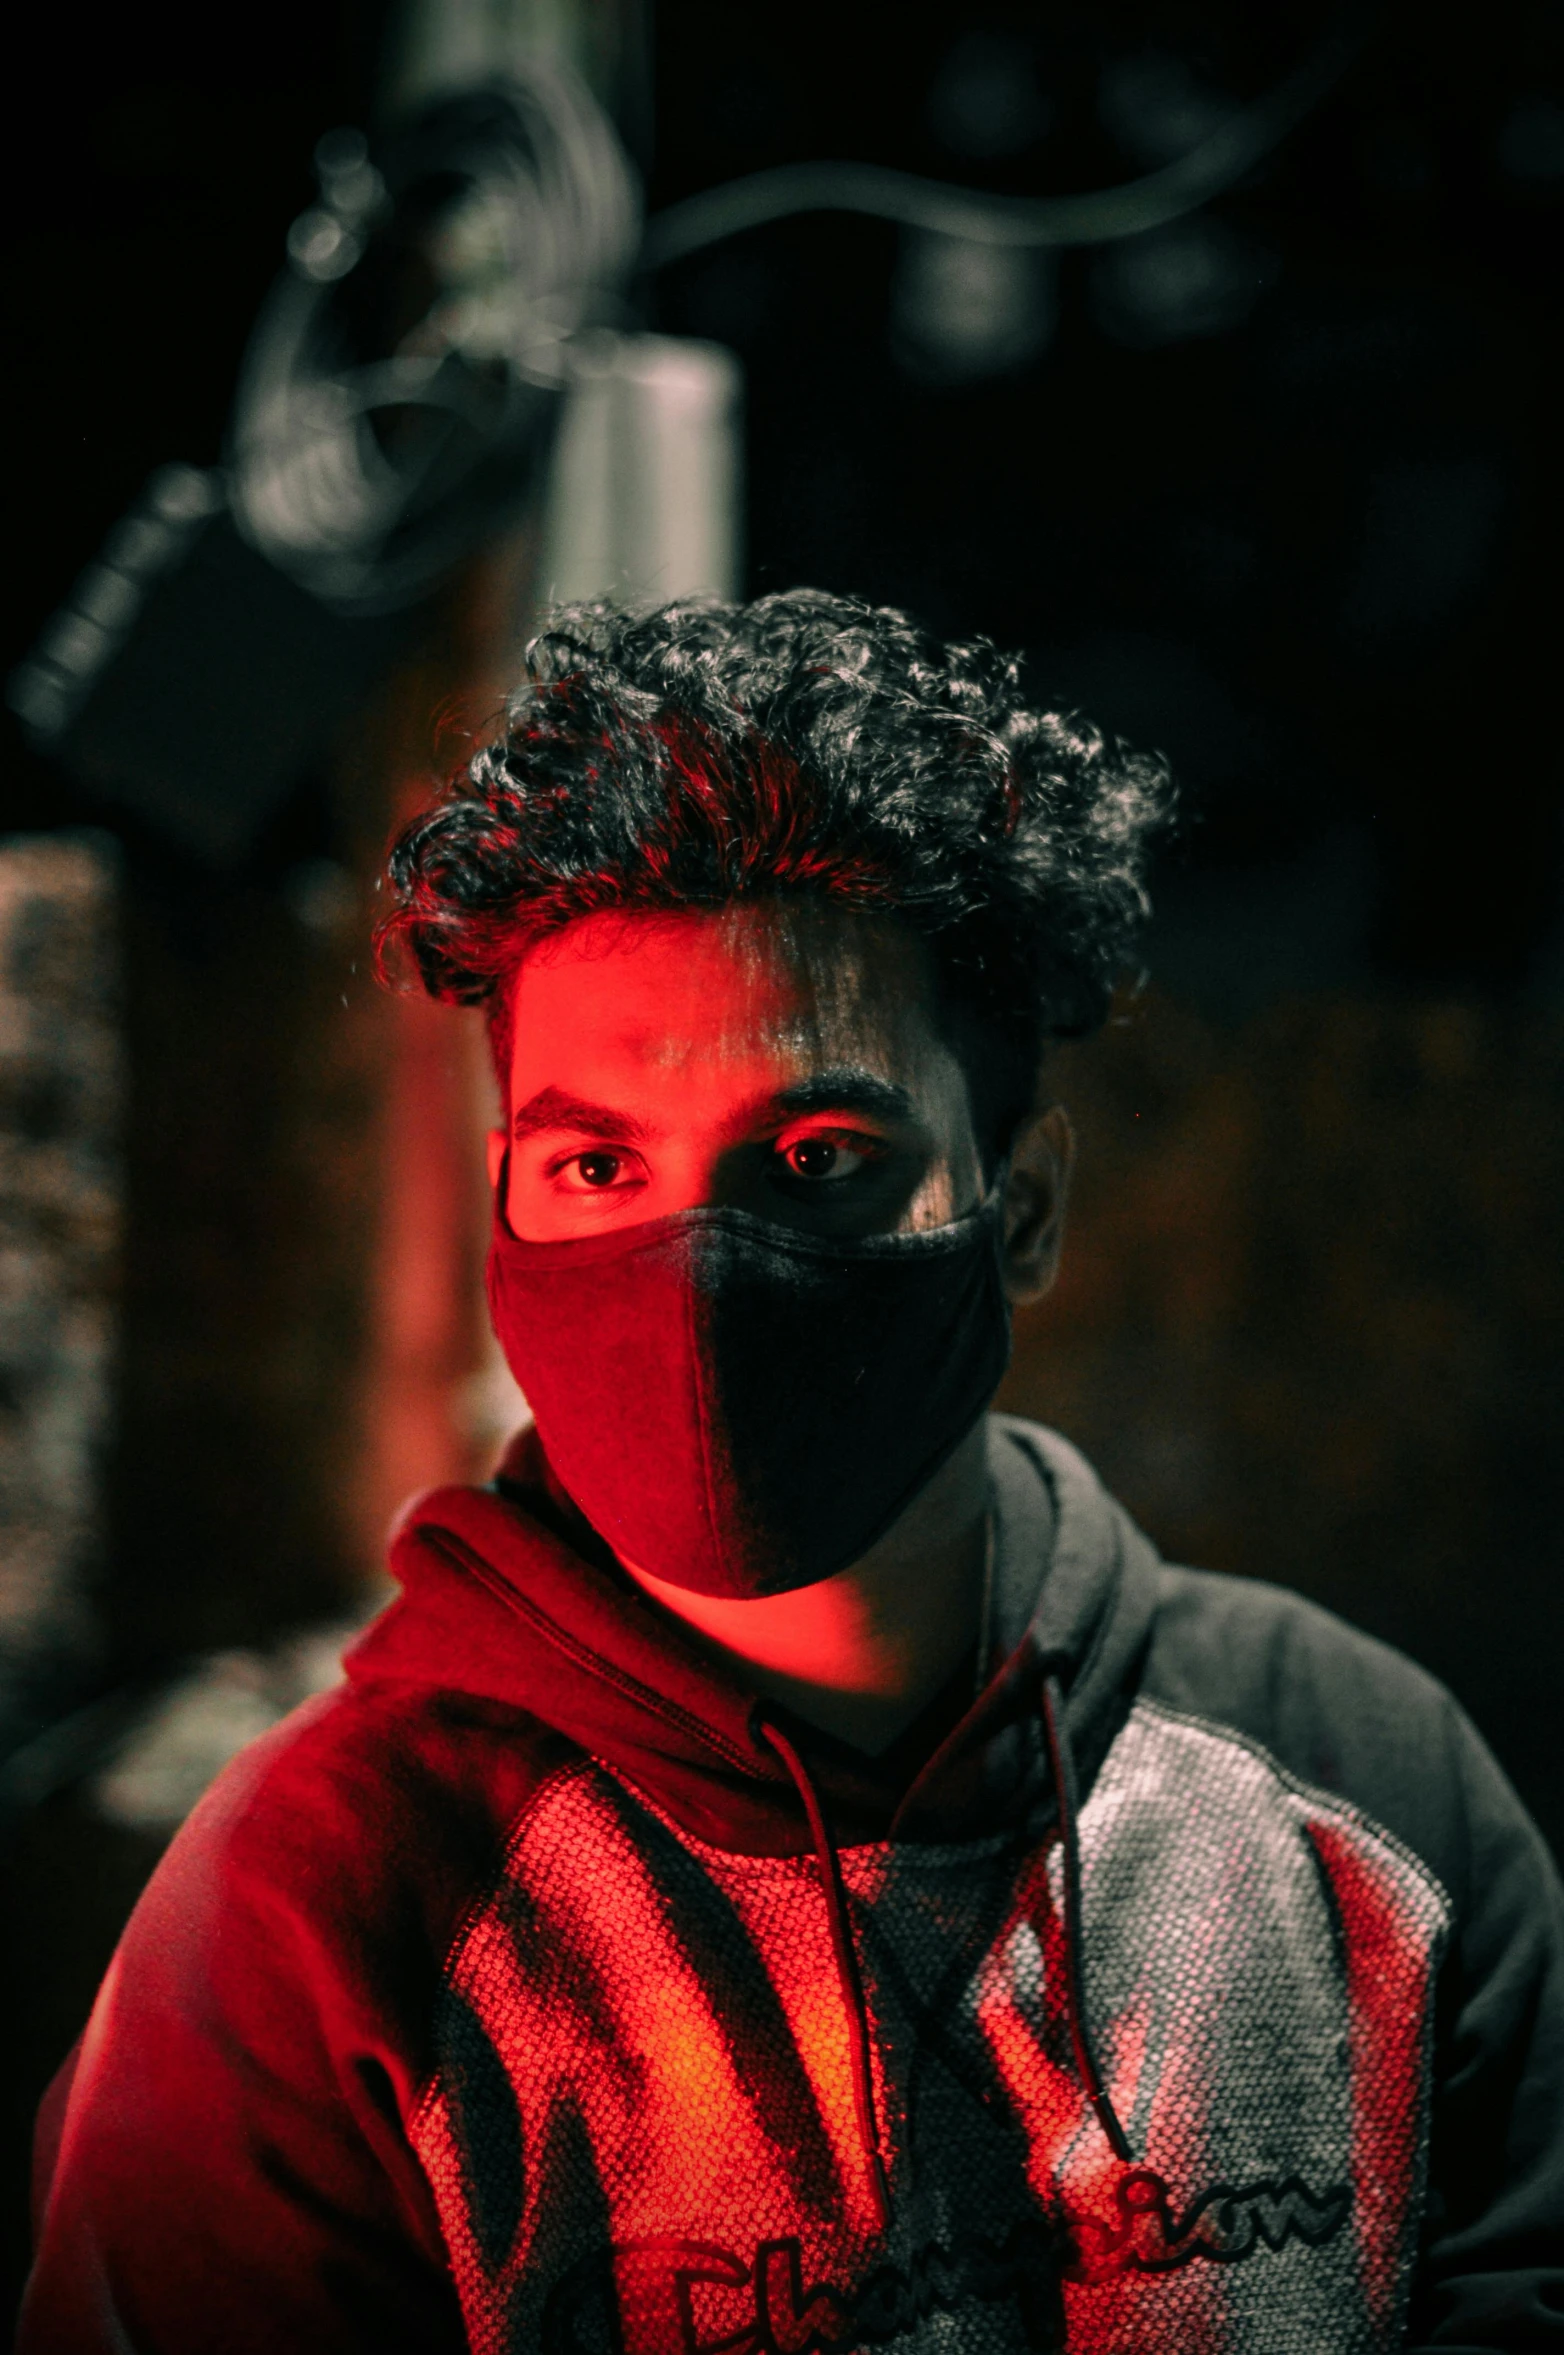 a man wearing a mask in a dark room, riyahd cassiem, gen z, looking at the camera, red and black colors